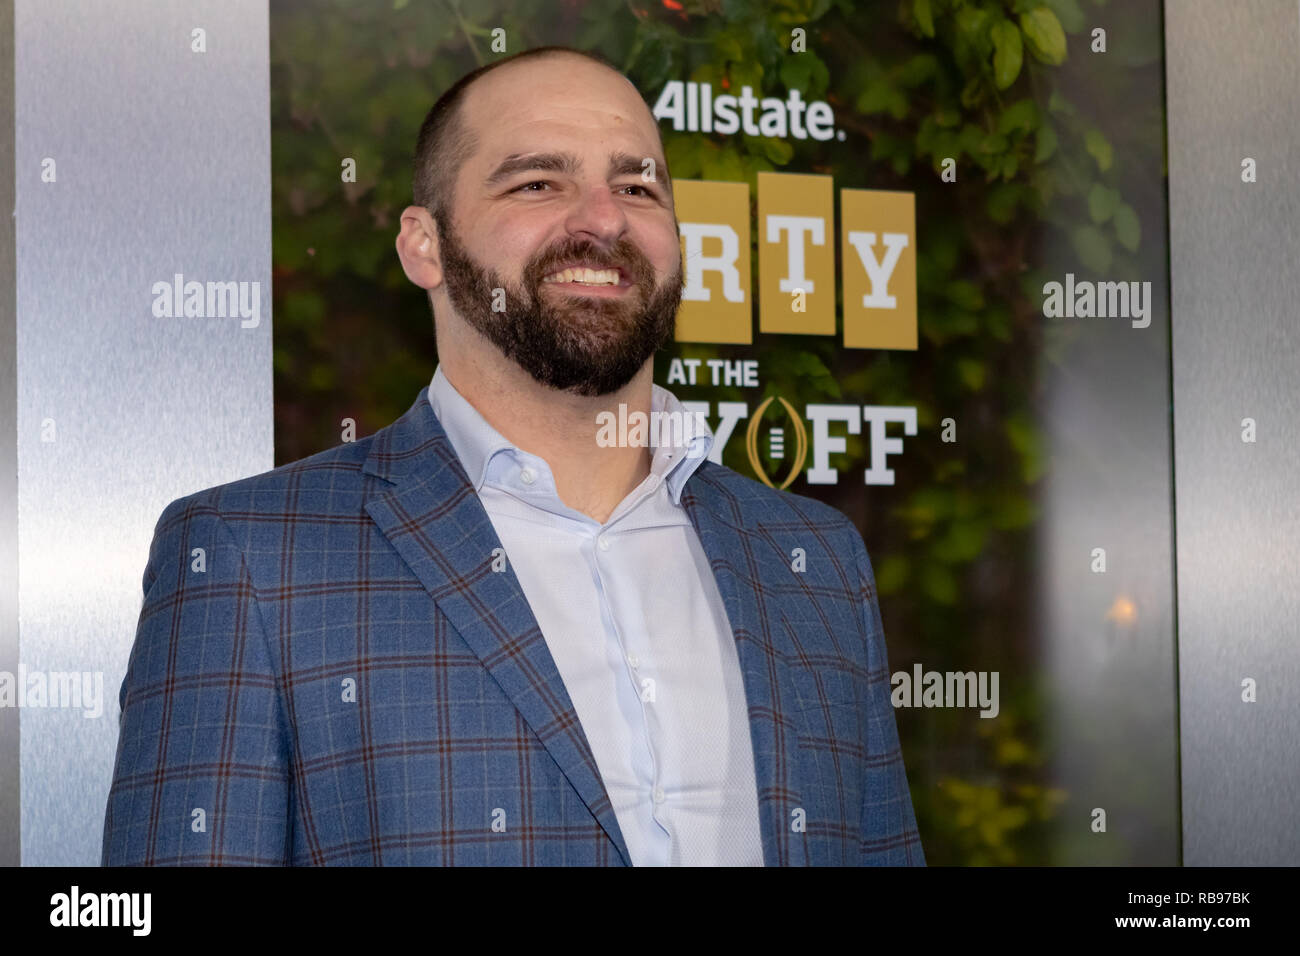 Santa Clara, California, USA. 5th Jan, 2019. January 05, 2019 - San Jose, California, U.S. - ESPN analyst Mike Golic Jr enters the Allstate Party at the Playoff on the blue carpet prior to the College Football Playoff National Championship game between the Clemson Tigers and the Alabama Crimson Tide at Levi's Stadium, Santa Clara, California. Credit: Adam Lacy/ZUMA Wire/Alamy Live News Stock Photo